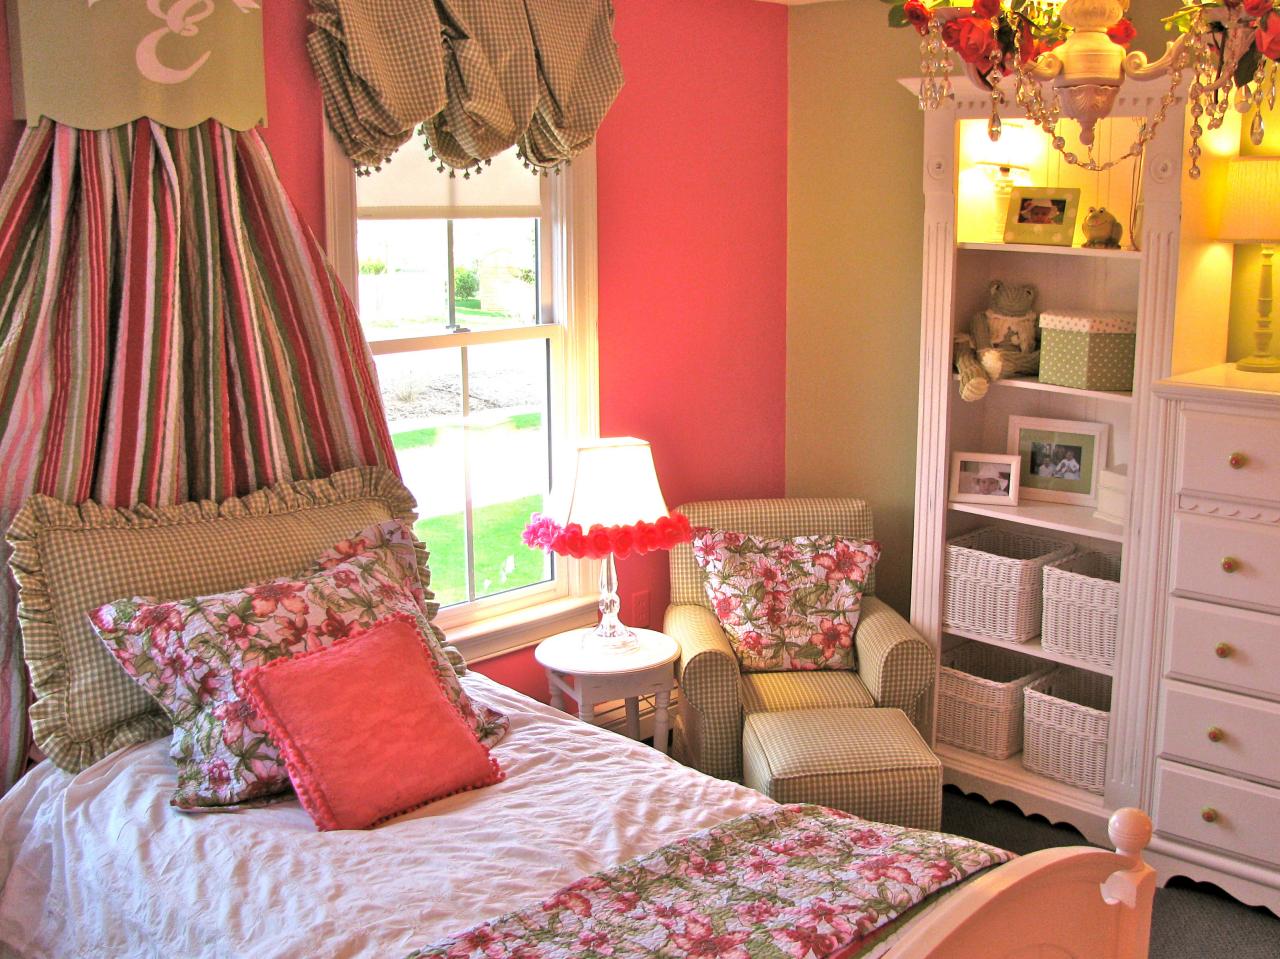 RMS_ssd-pink-sage-cottage-style-girls-bedroom_s4x3.jpg.rend.hgtvcom.1280.960